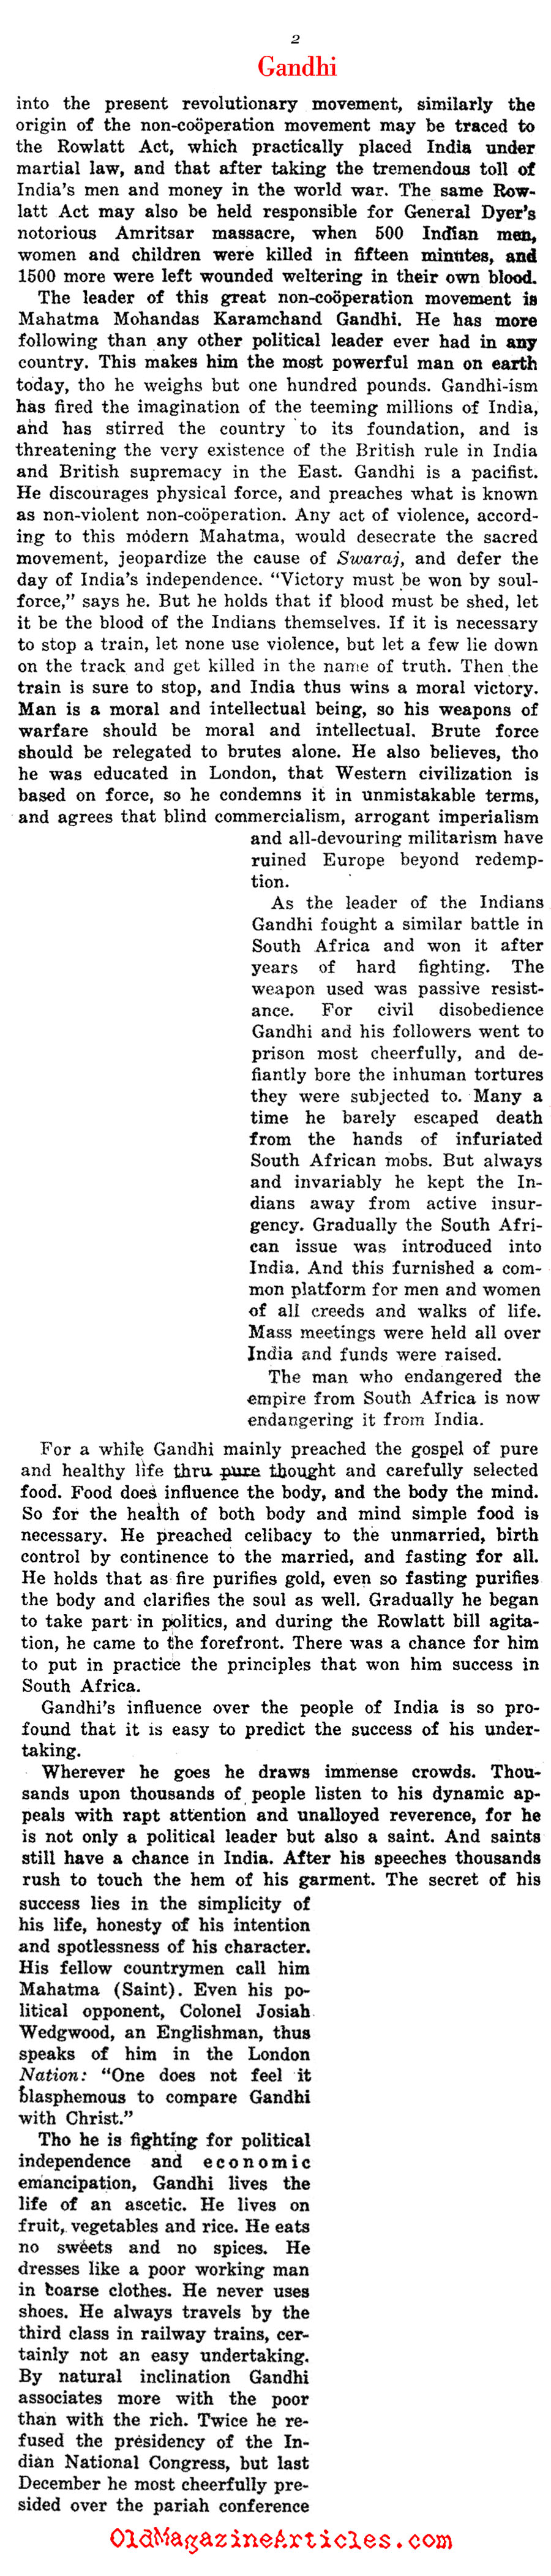  A Profile of Mahatma Gandhi (The Independent, 1921)